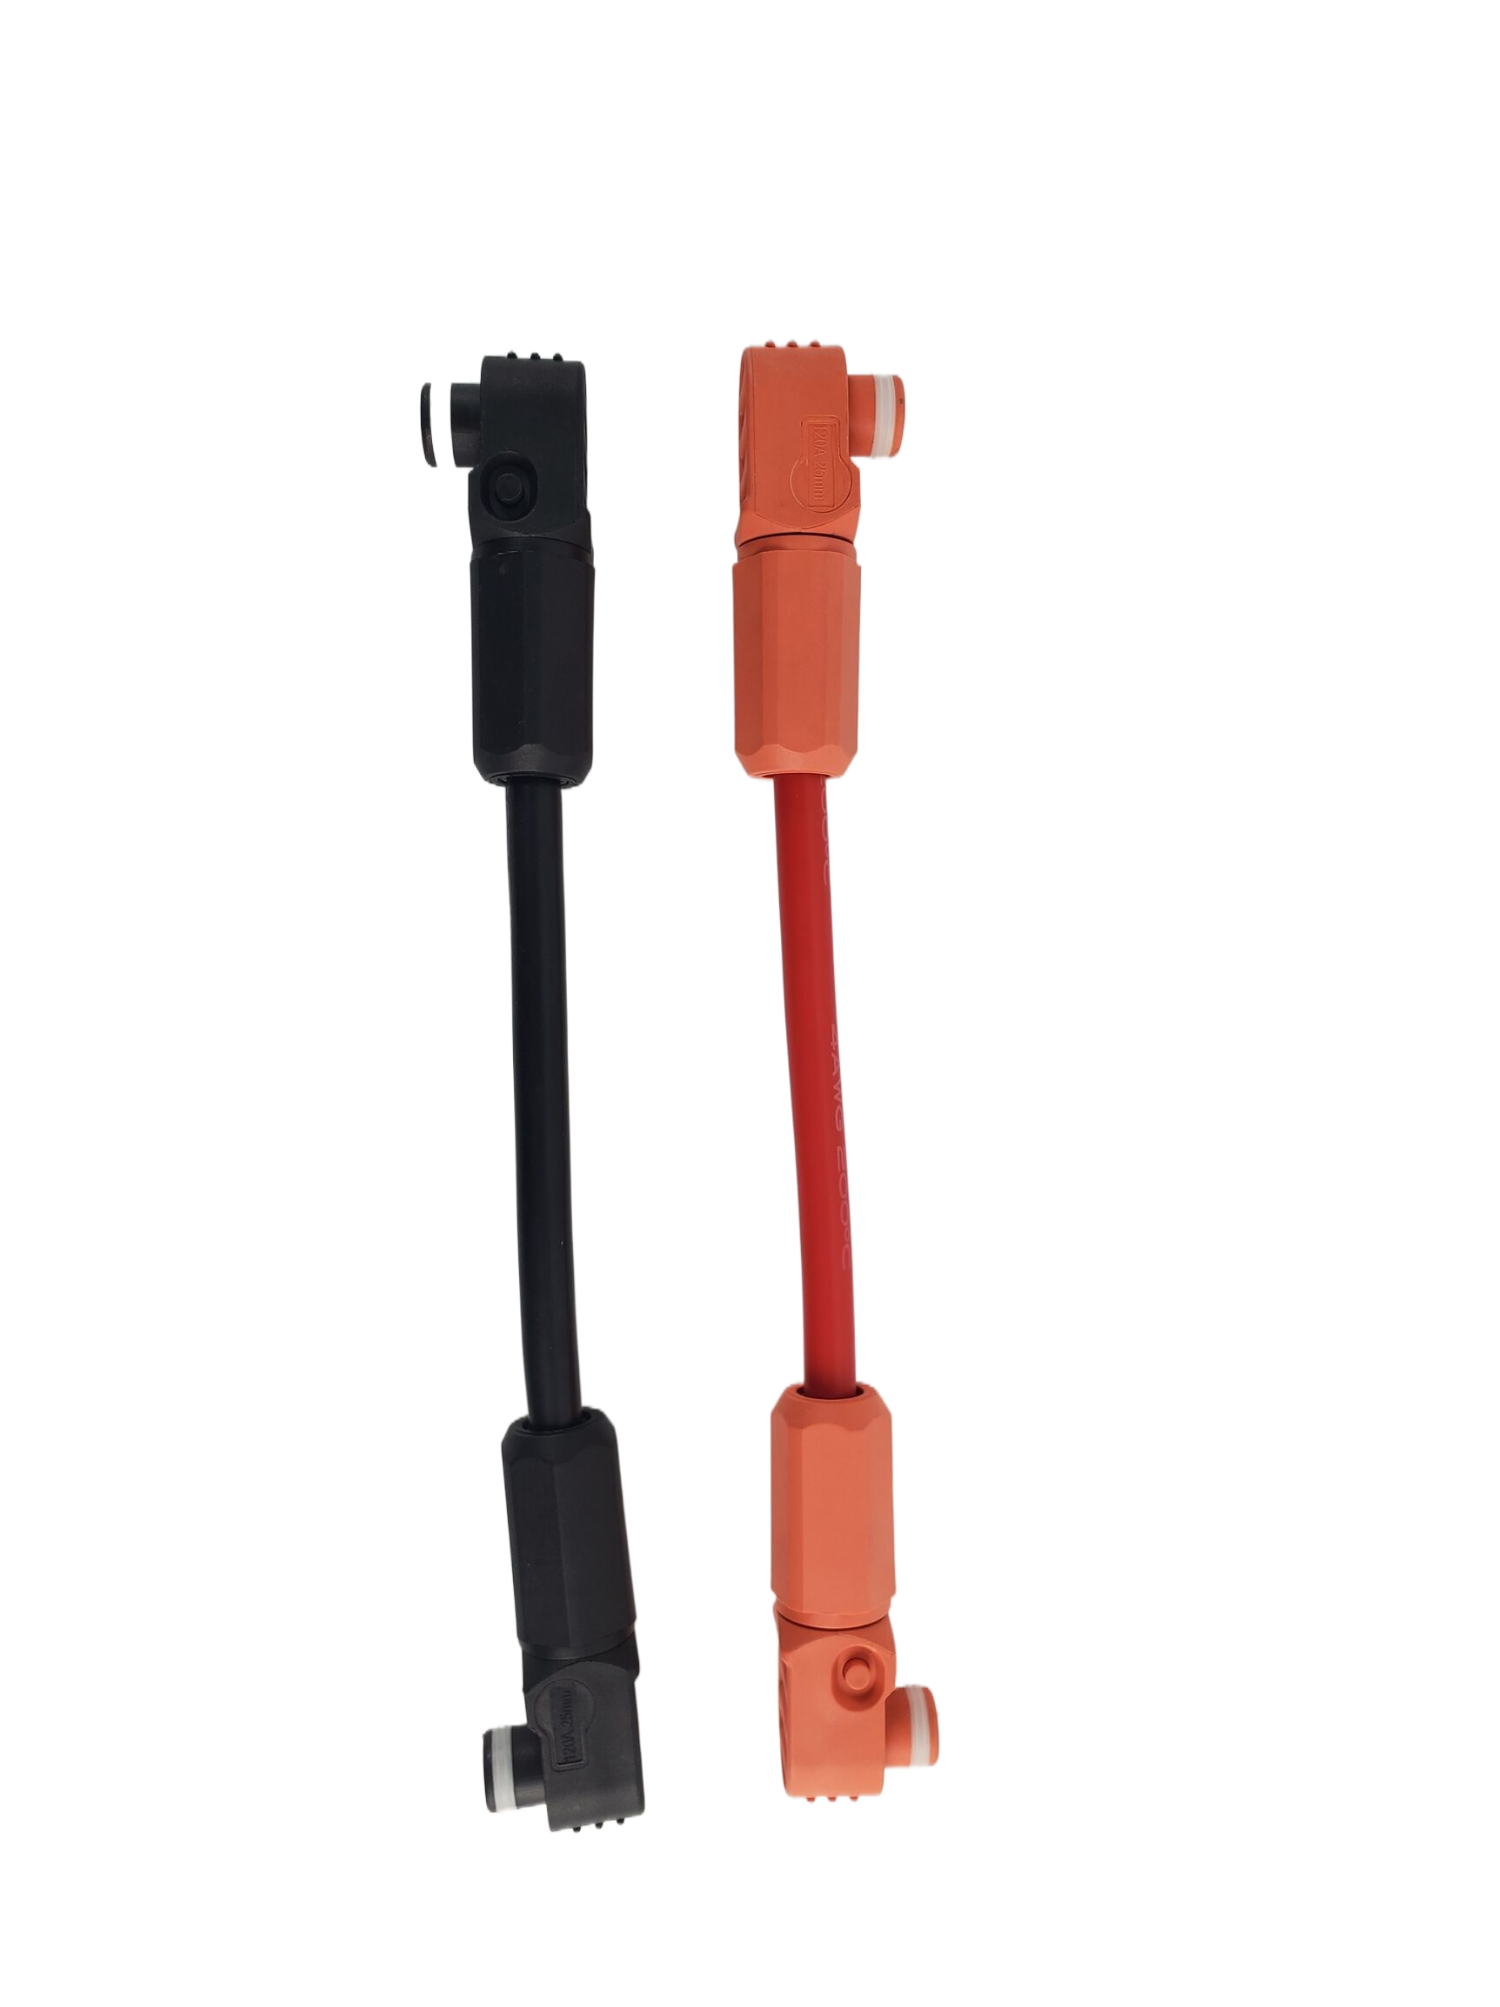 Power Parallel Cable with connector for LiFePO4 Battery Pack